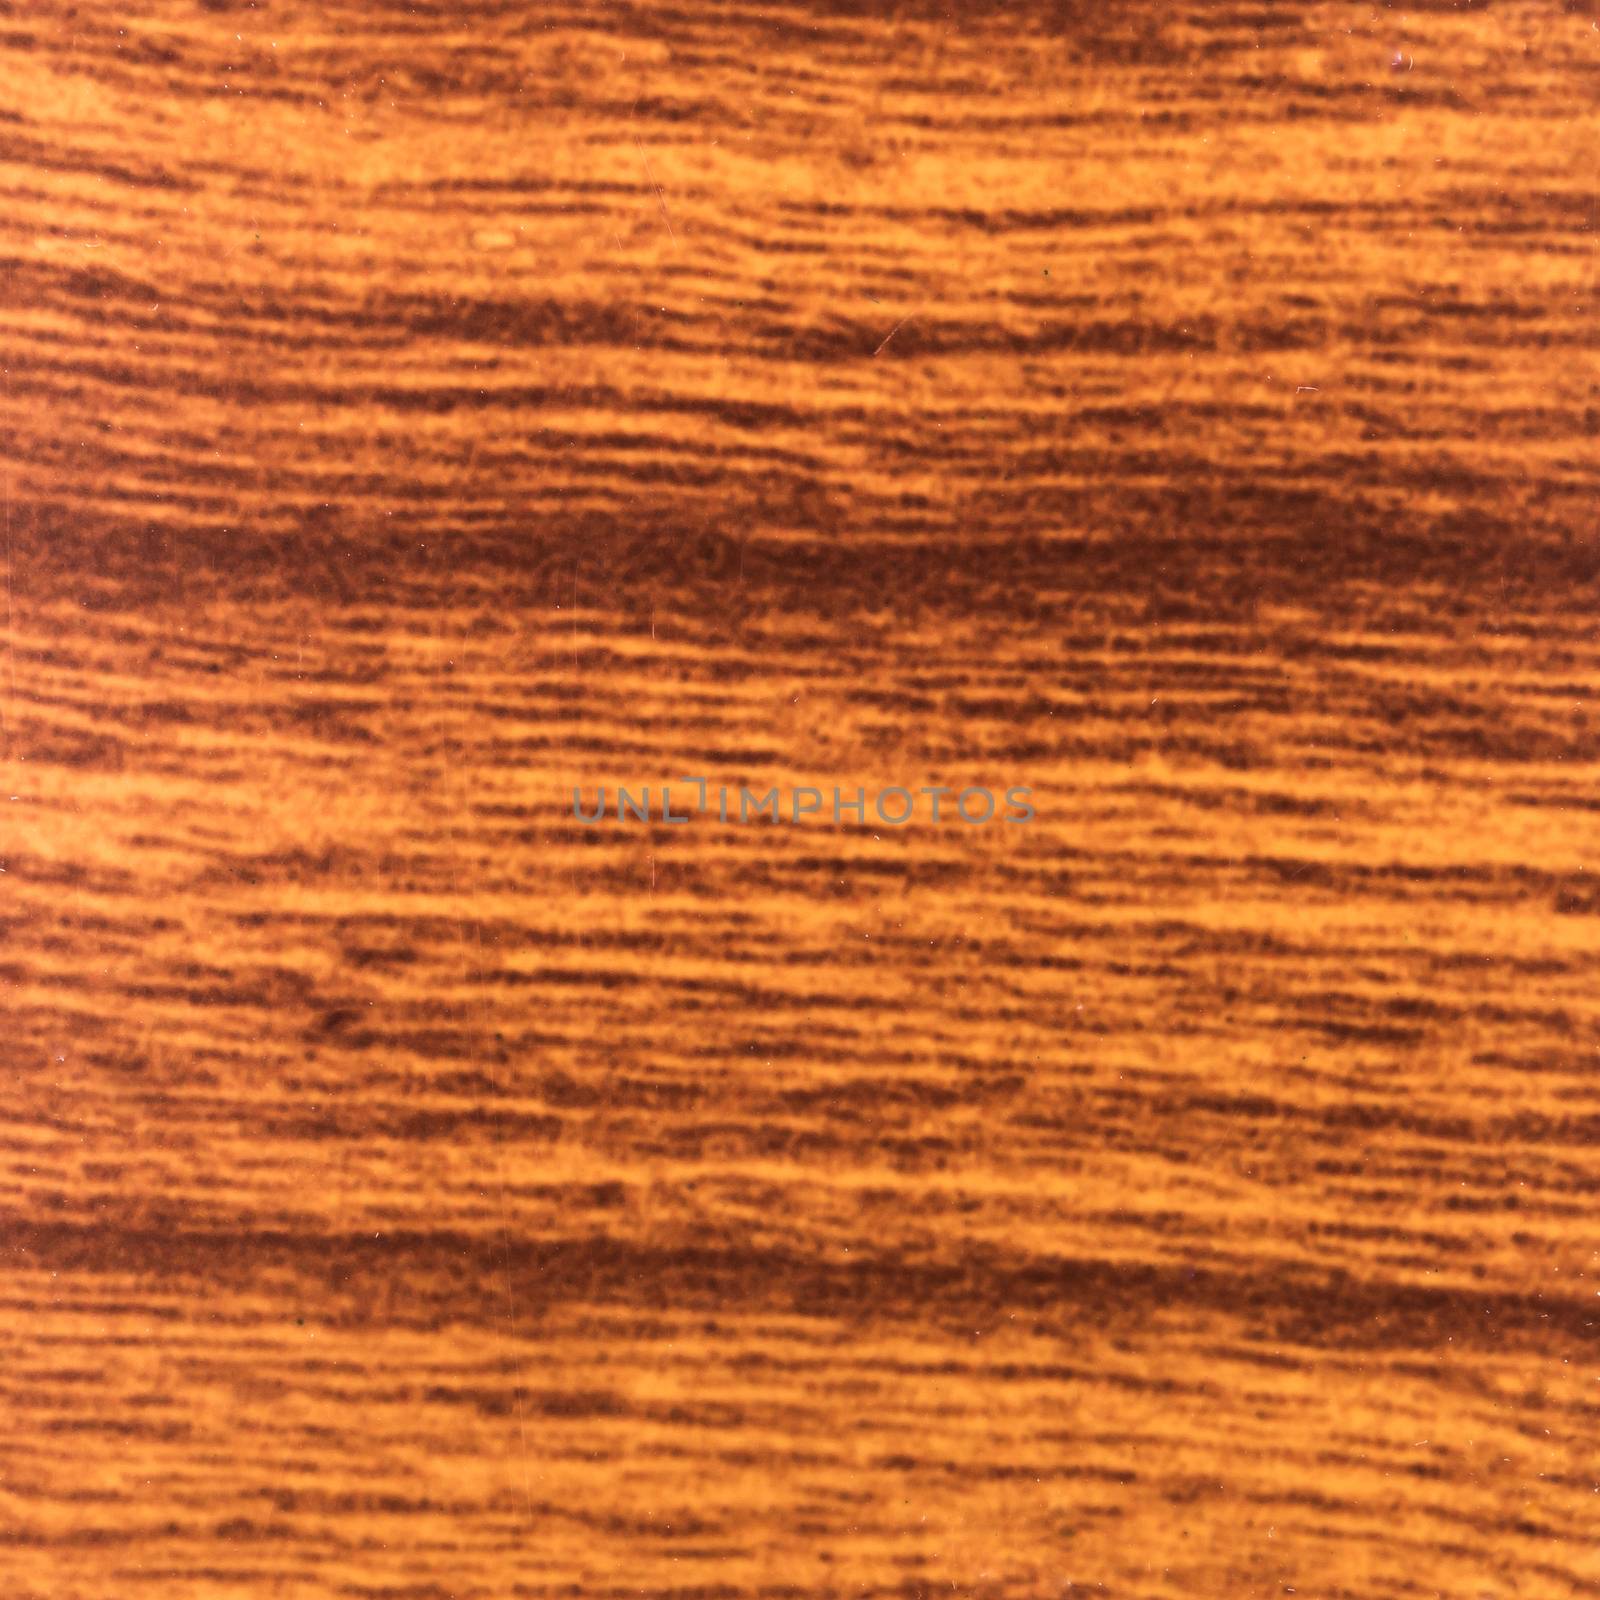 Abstract wood texture with focus on the wood's grain. Teak wood by AnaMarques